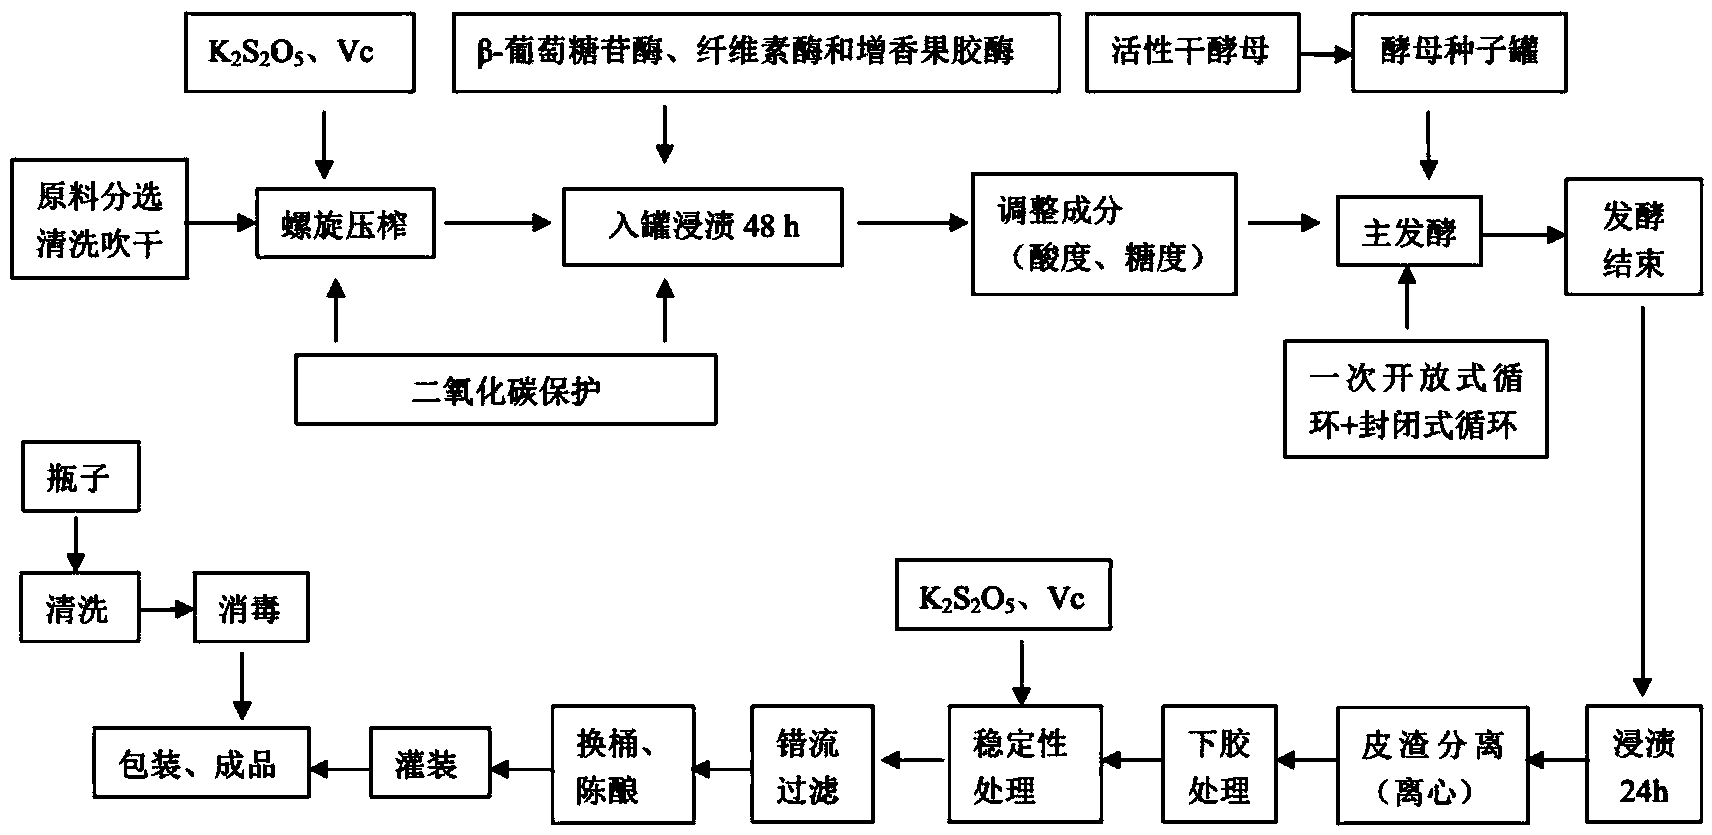 Method for preparing dry brewed wine by means of fermenting nanguo pear mixed juice